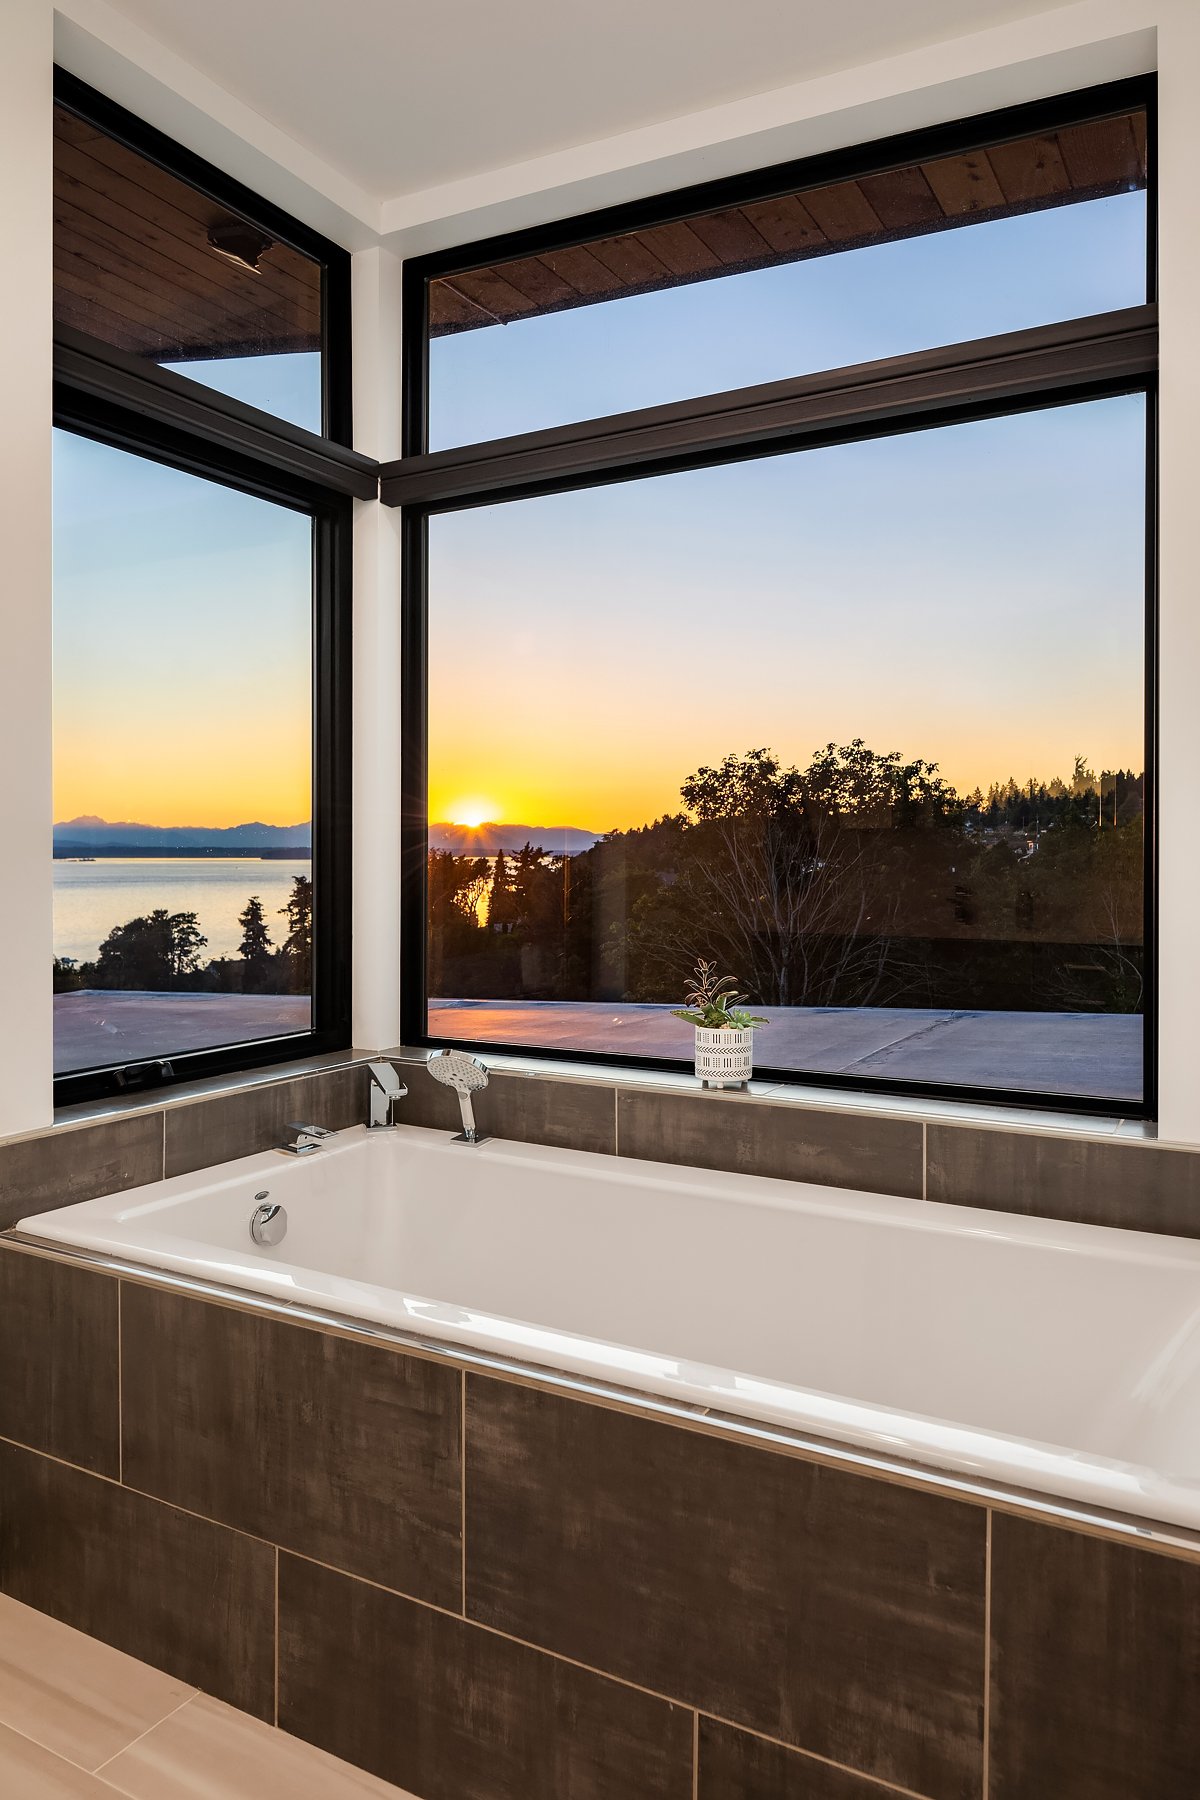 Harka Architecture_Puget Sound Residence_bathroom view.jpg